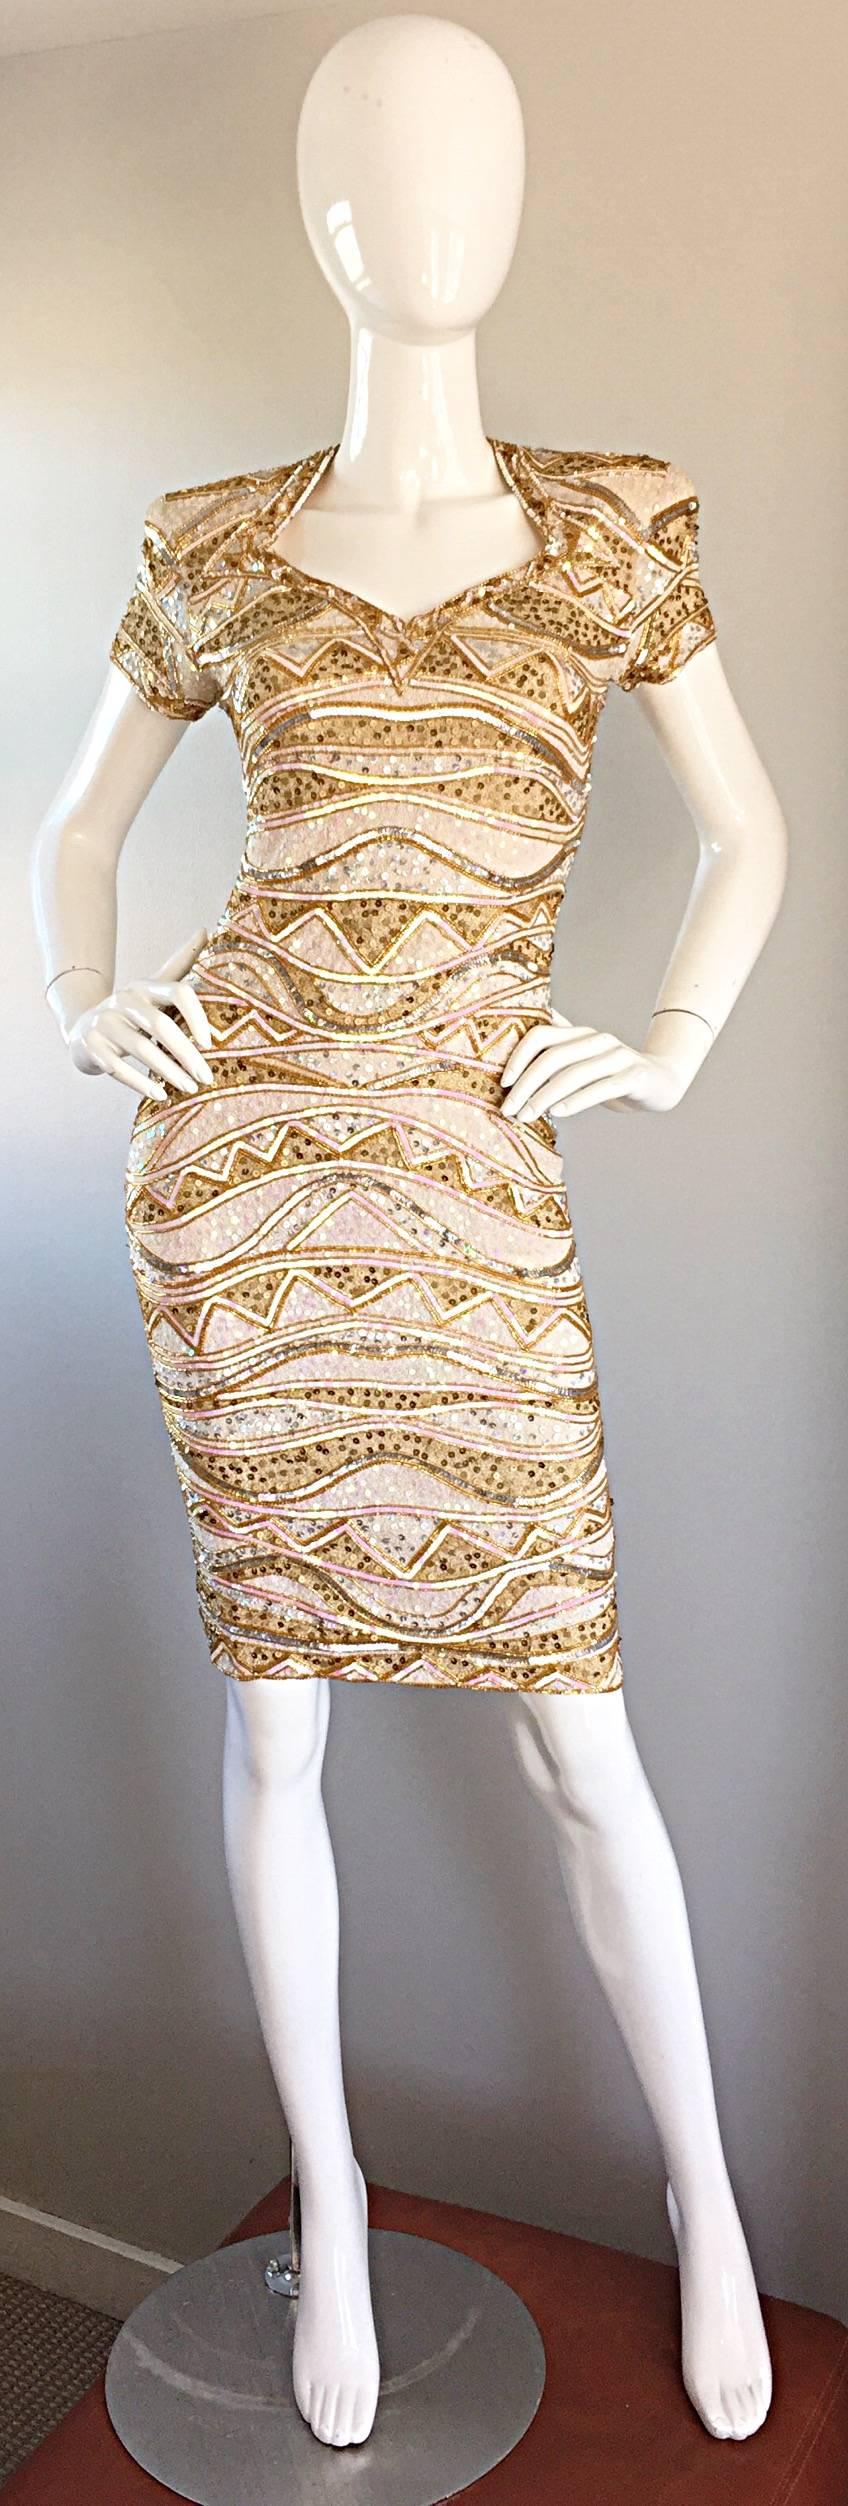 Naeem Khan Riazee Vintage Open Back Sequin + Beaded Bodycon Size 6 Wiggle Dress For Sale 2